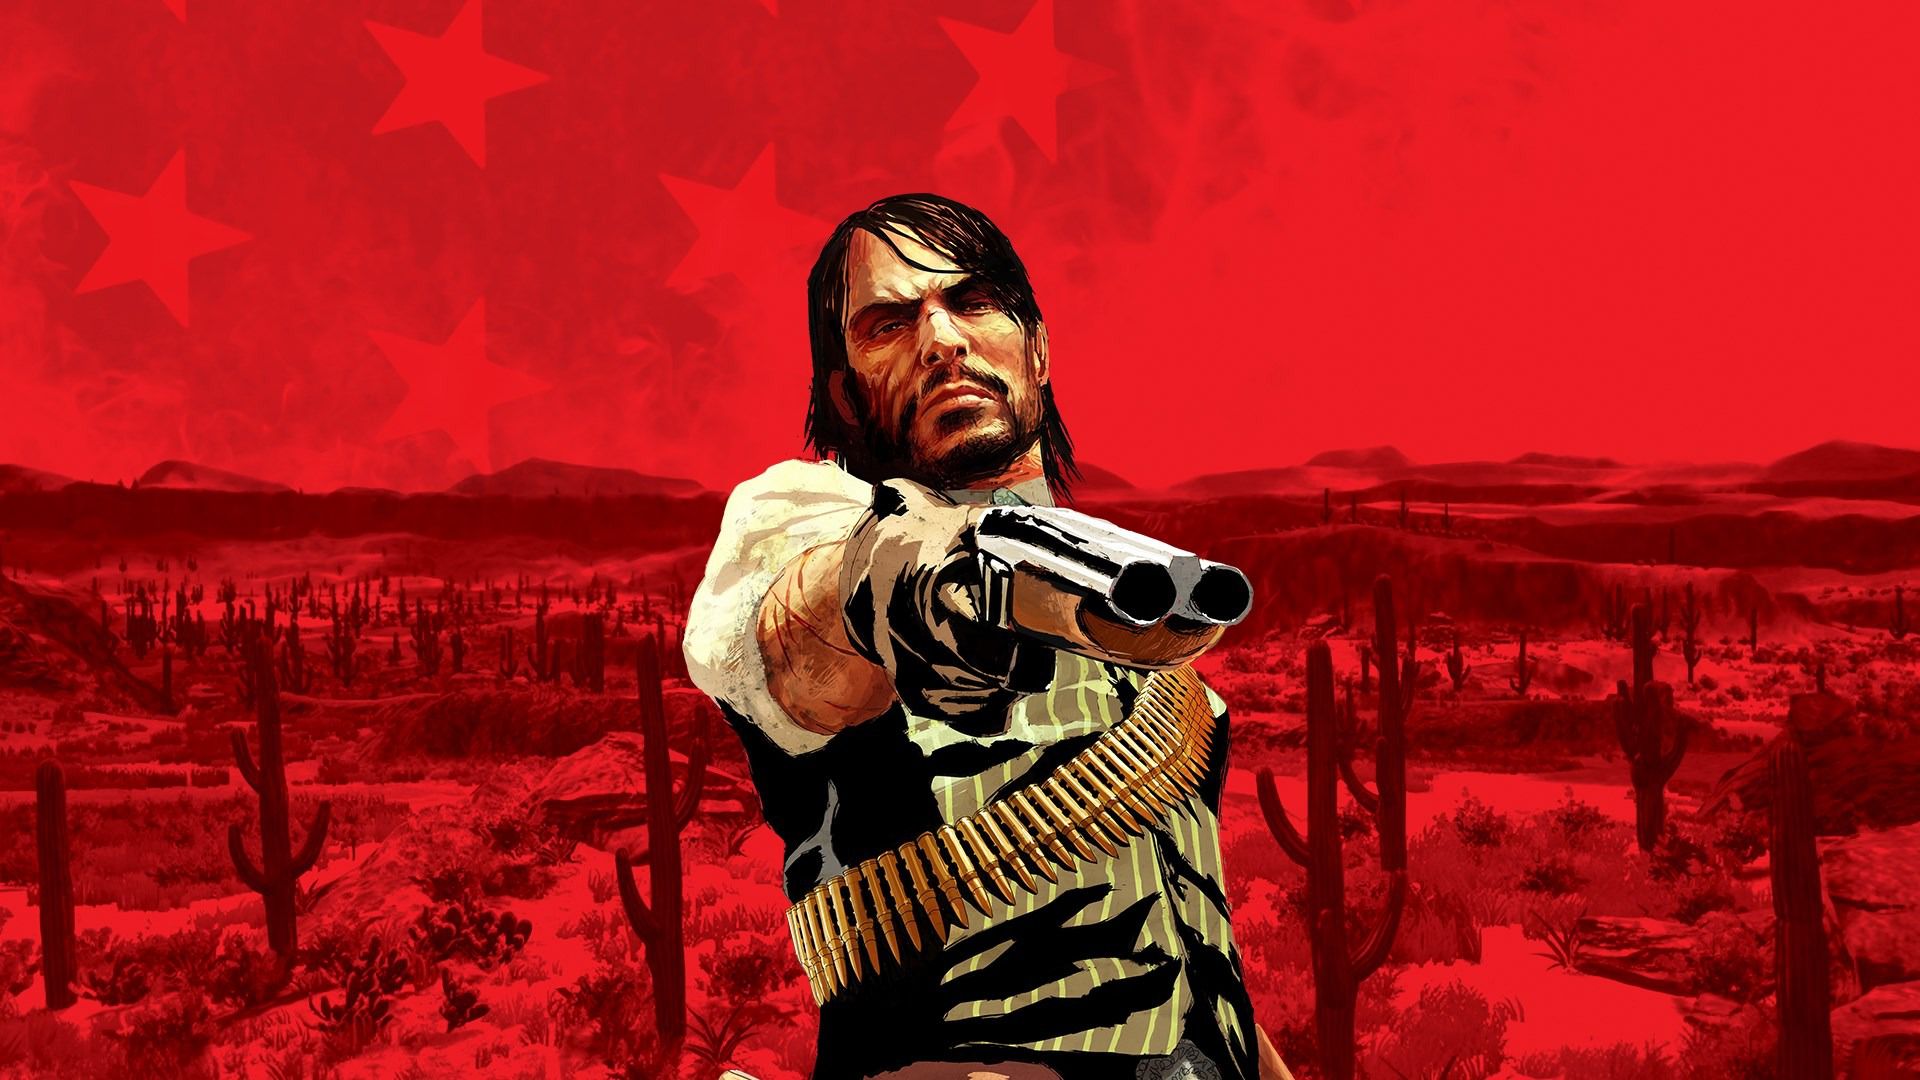 100+] Android Red Dead Redemption 2 Backgrounds